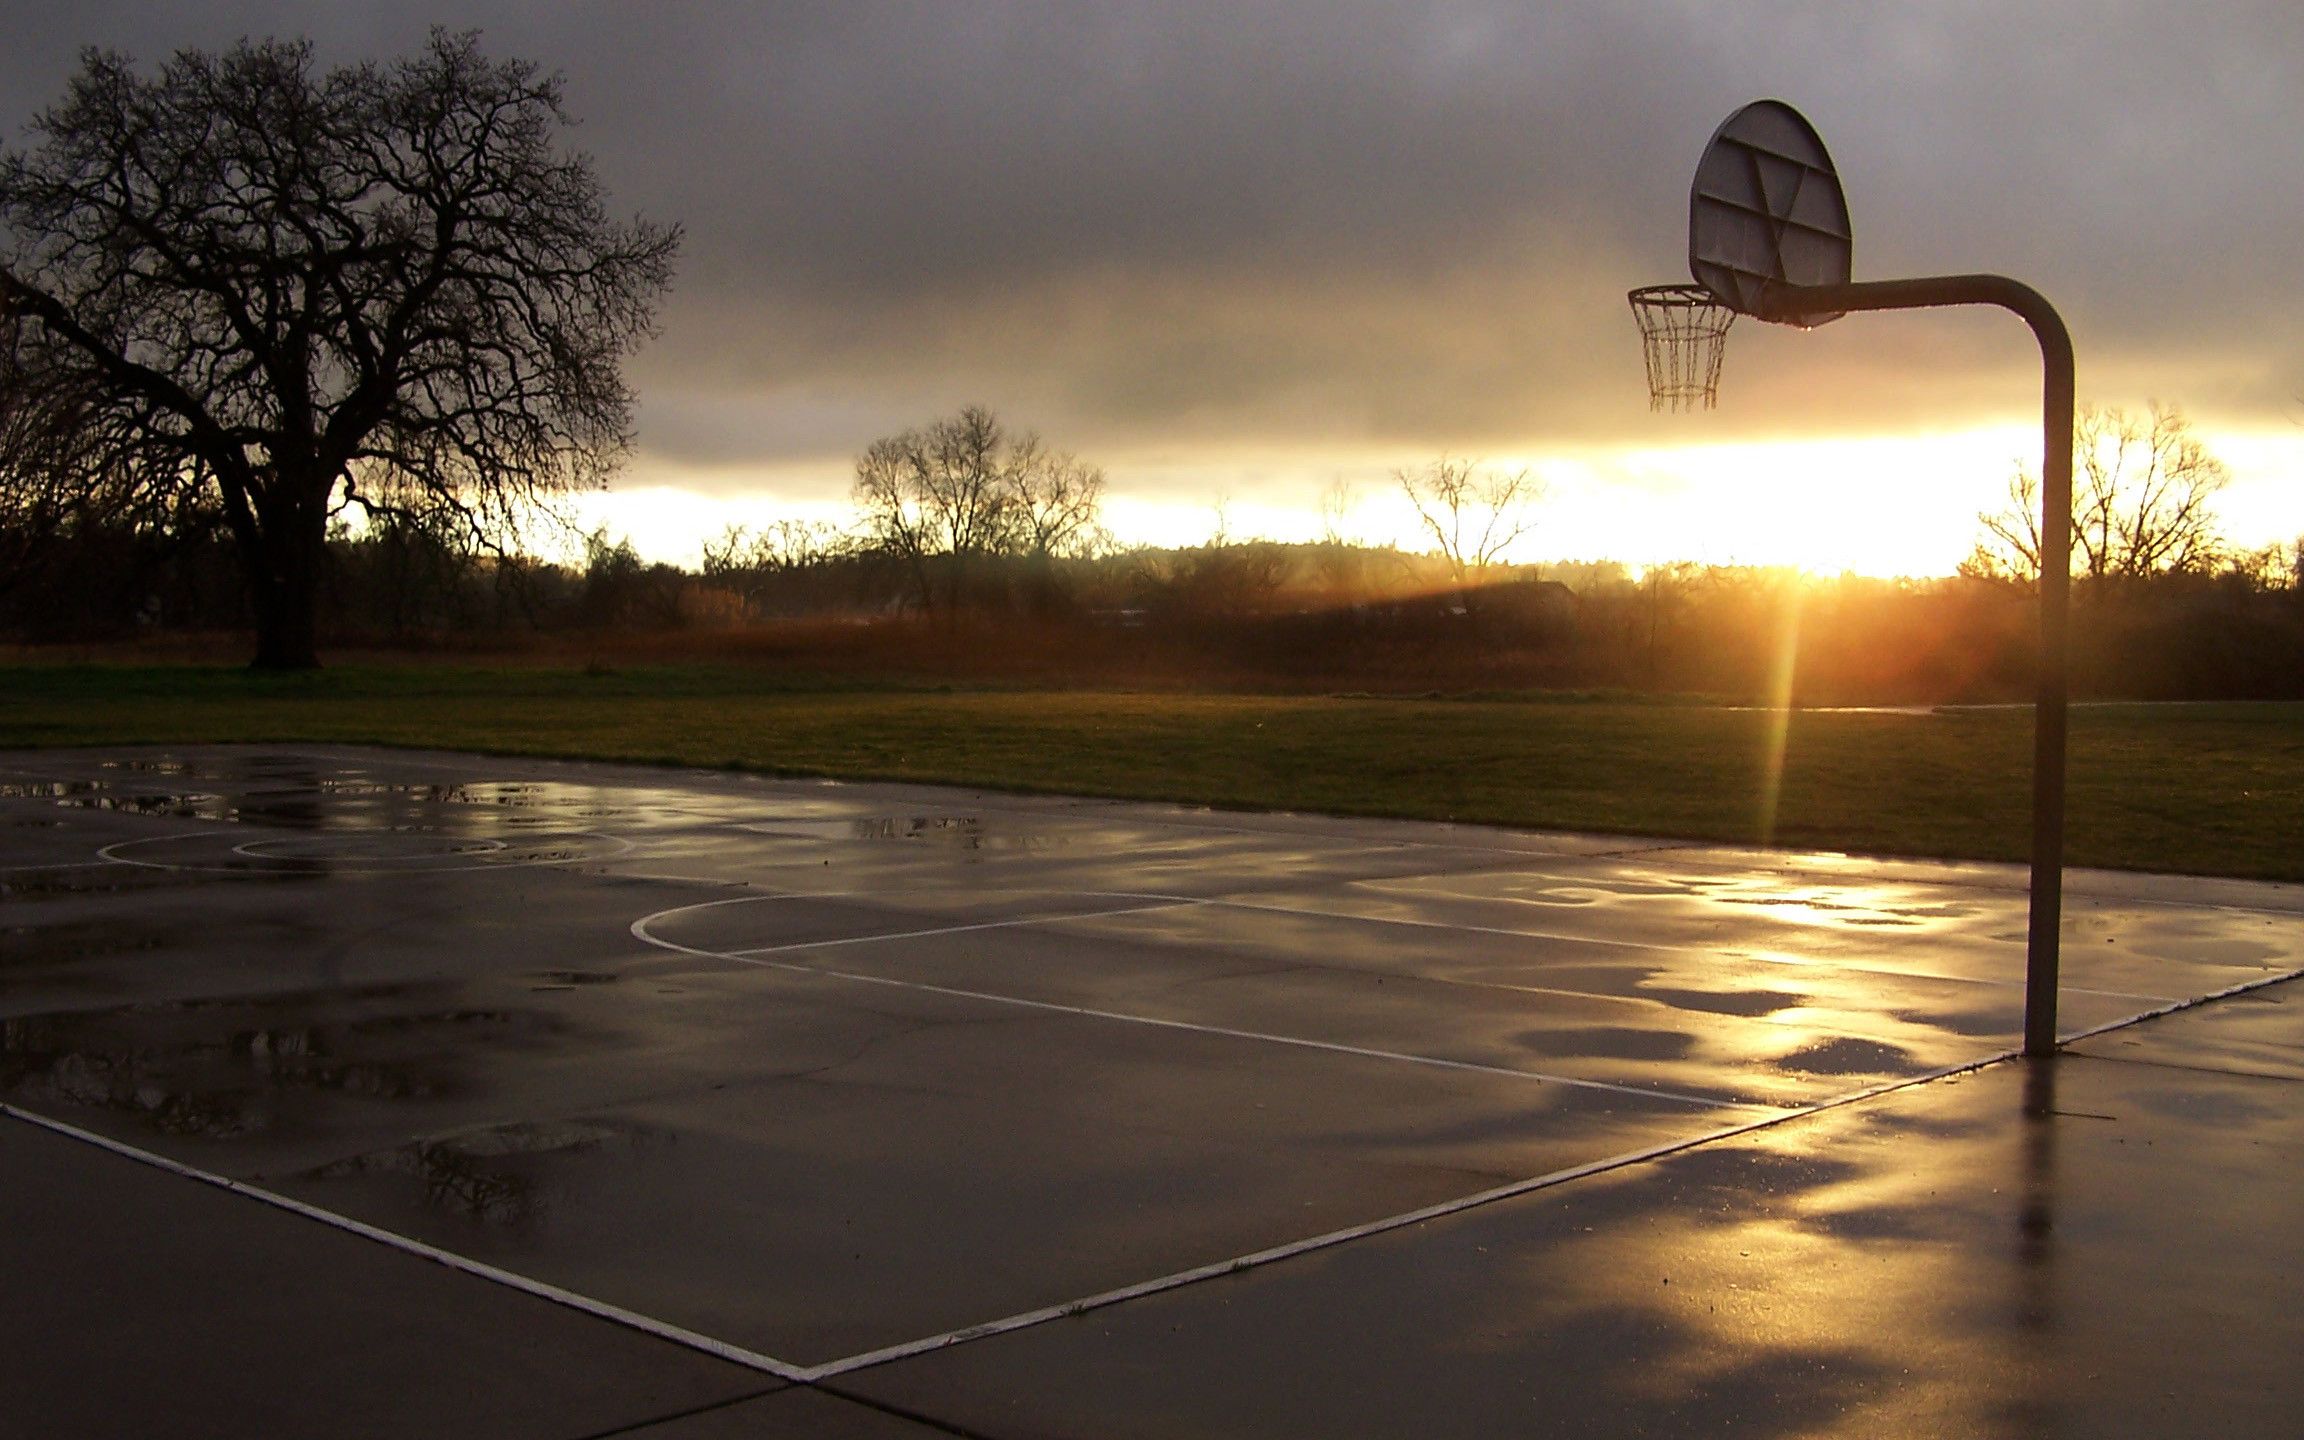 Wallpaper ID 253161  a basketball about to enter a bball net in an  outdoor court hoops 4k wallpaper free download